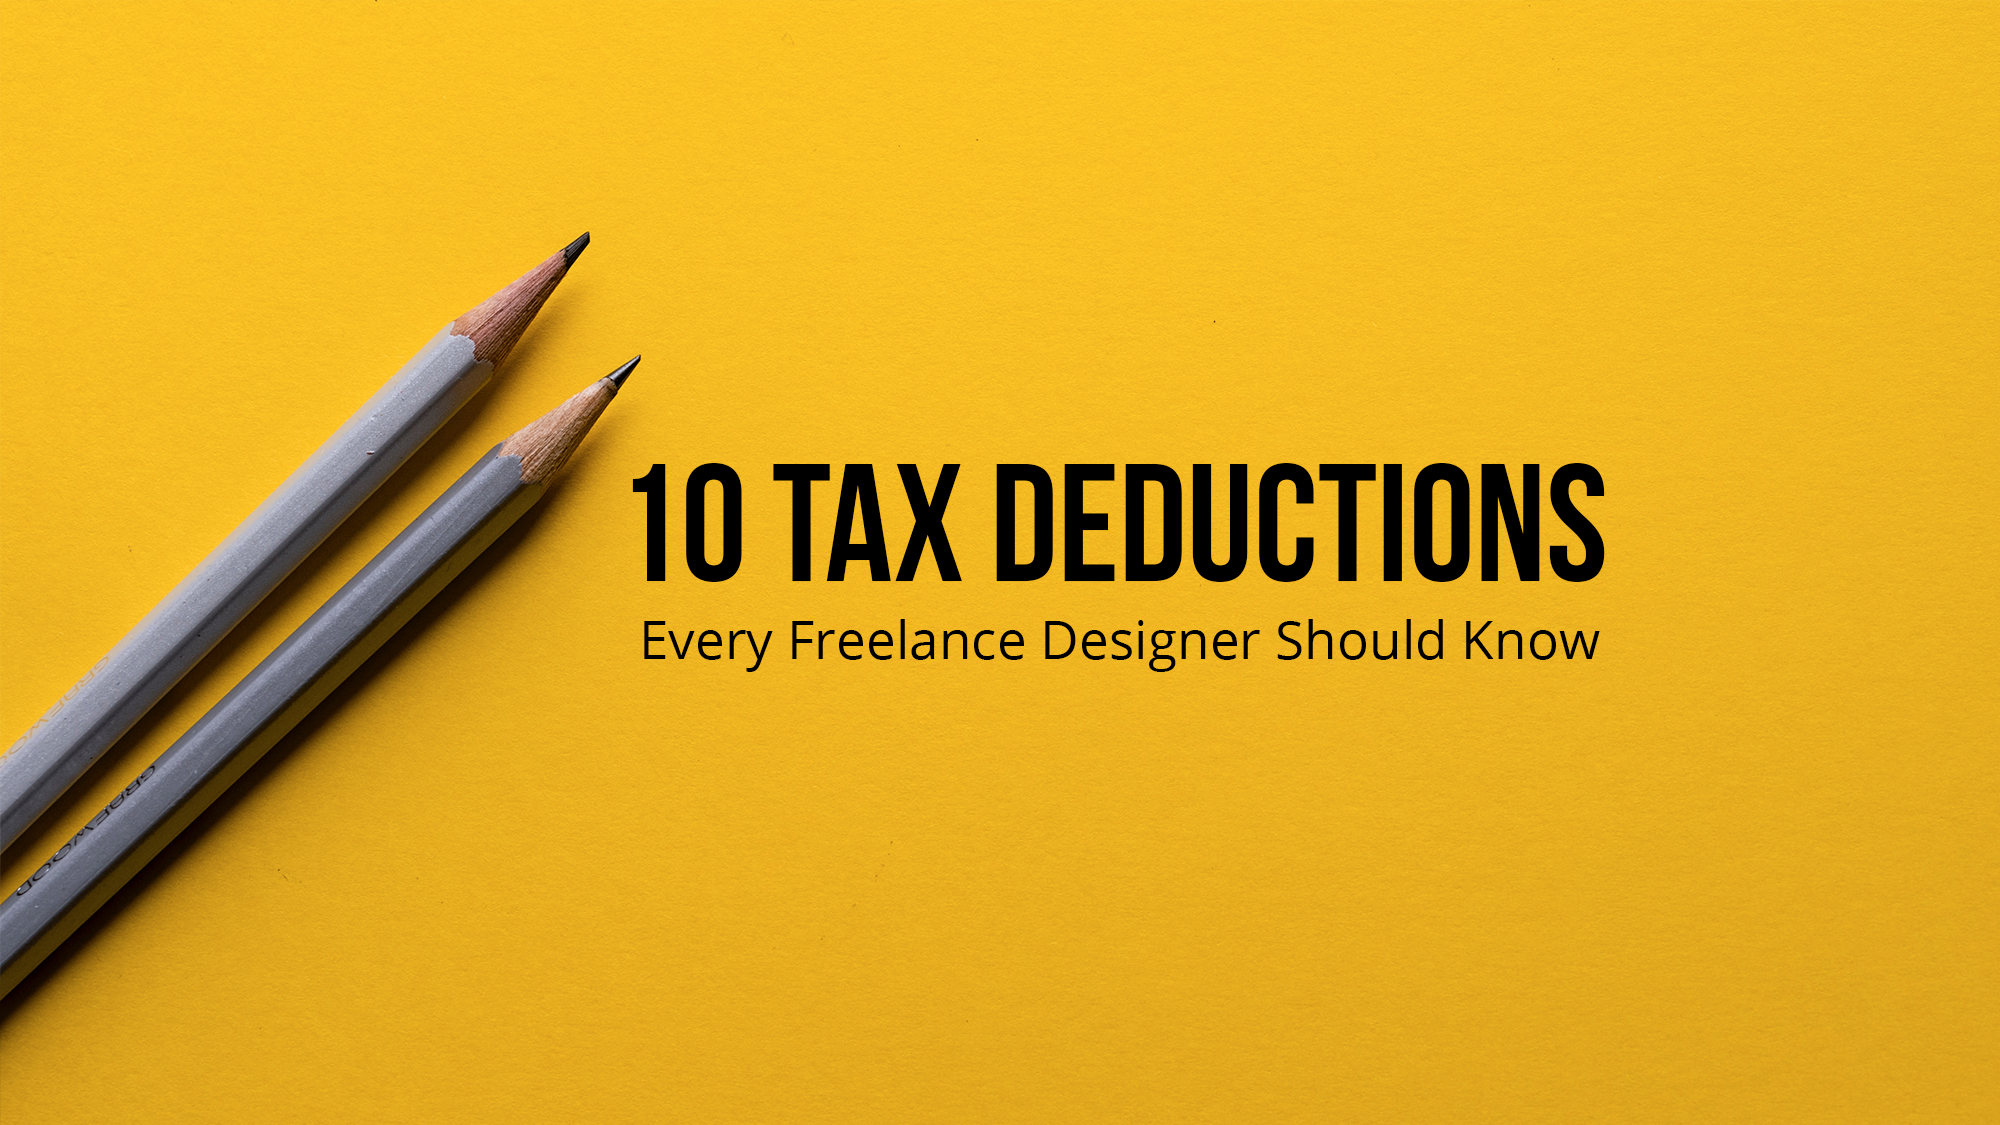 Tax Write-Offs For Freelance Designers